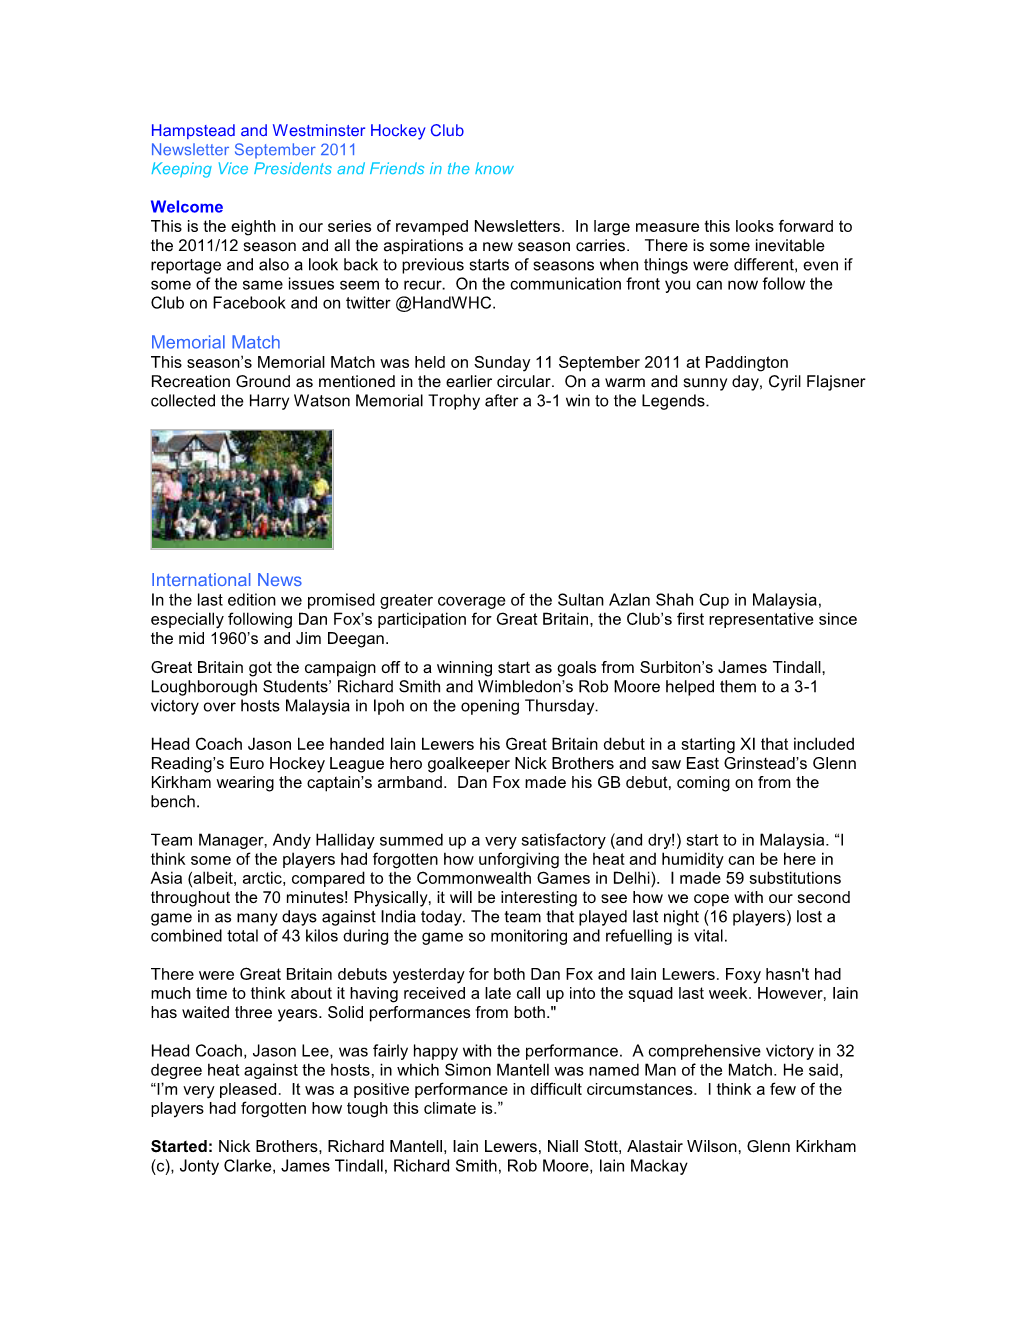 Hampstead and Westminster Hockey Club Newsletter September 2011 Keeping Vice Presidents and Friends in the Know